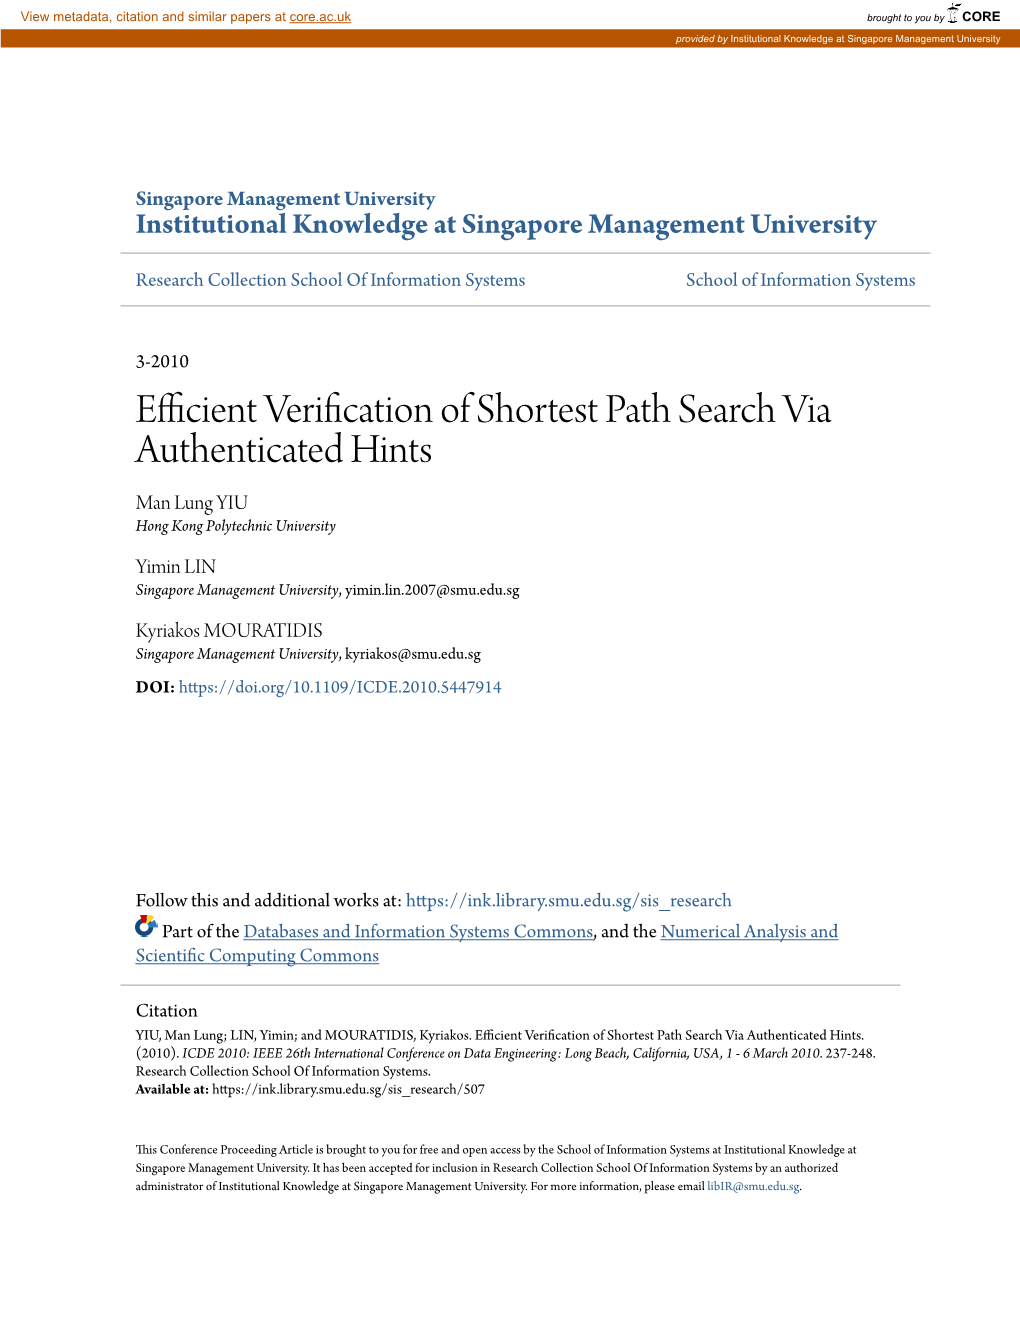 Efficient Verification of Shortest Path Search Via Authenticated Hints Man Lung YIU Hong Kong Polytechnic University